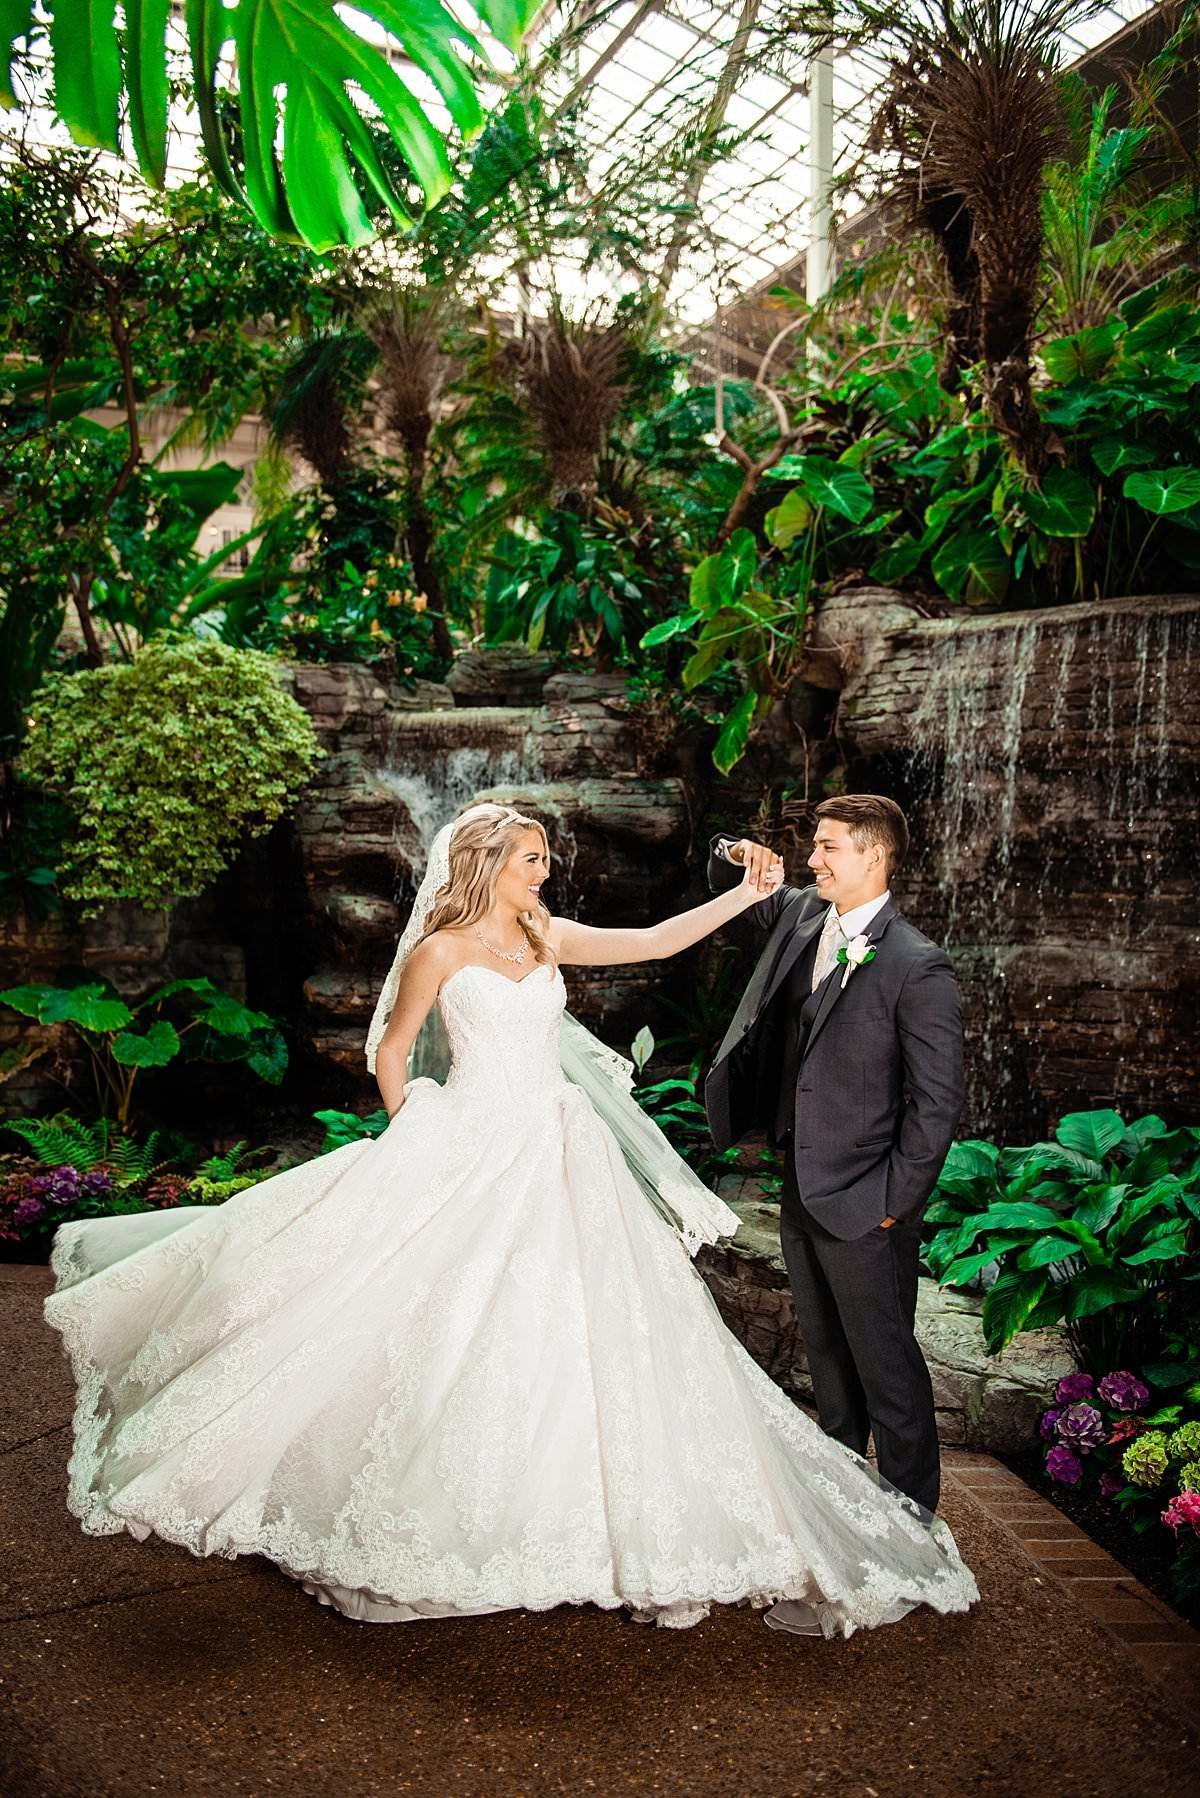 Groom spinning his bride who is wearing a Cinderella ballgown next to one of the atrium waterfalls inside the Gaylord Opryland Hotel